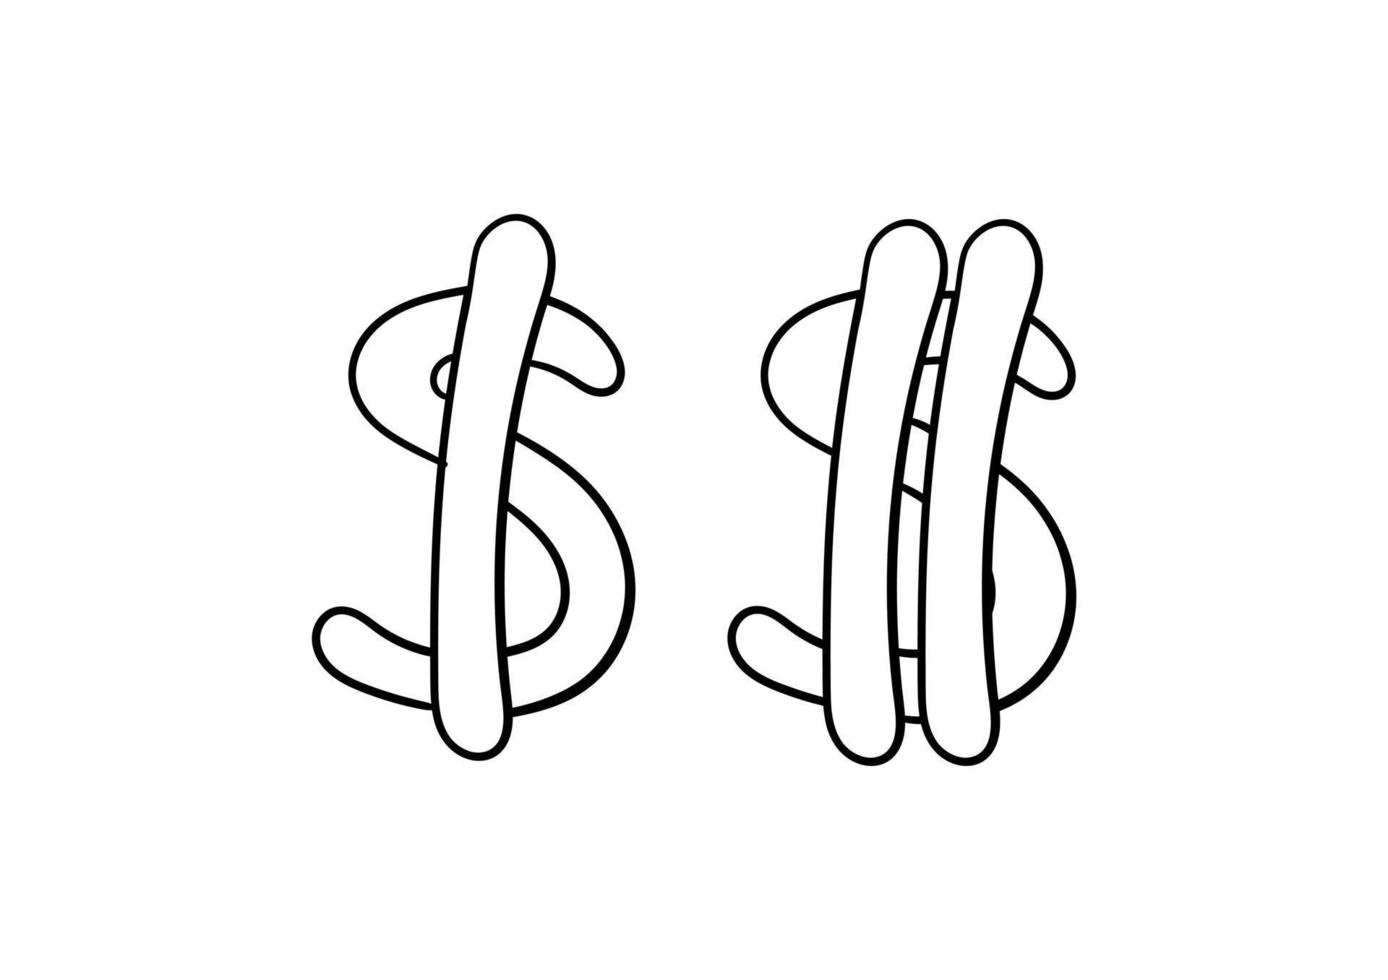 illustration of a dollar sign in two different styles vector